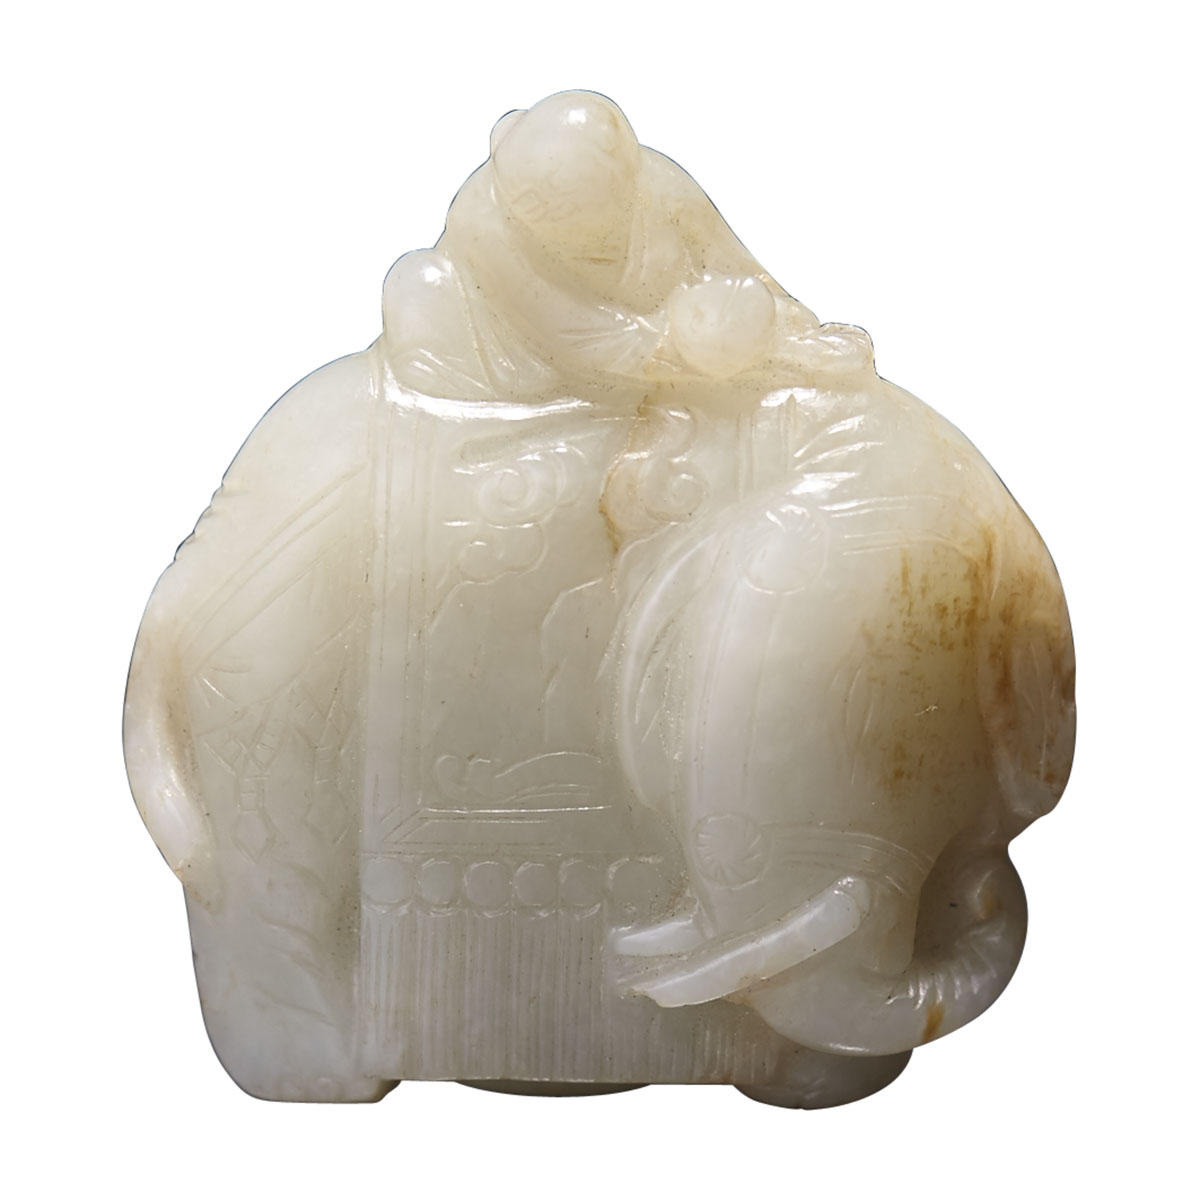 A Celadon White Jade 'Elephant and Boy' Carving, Qing Dynasty, 18th Century or Earlier